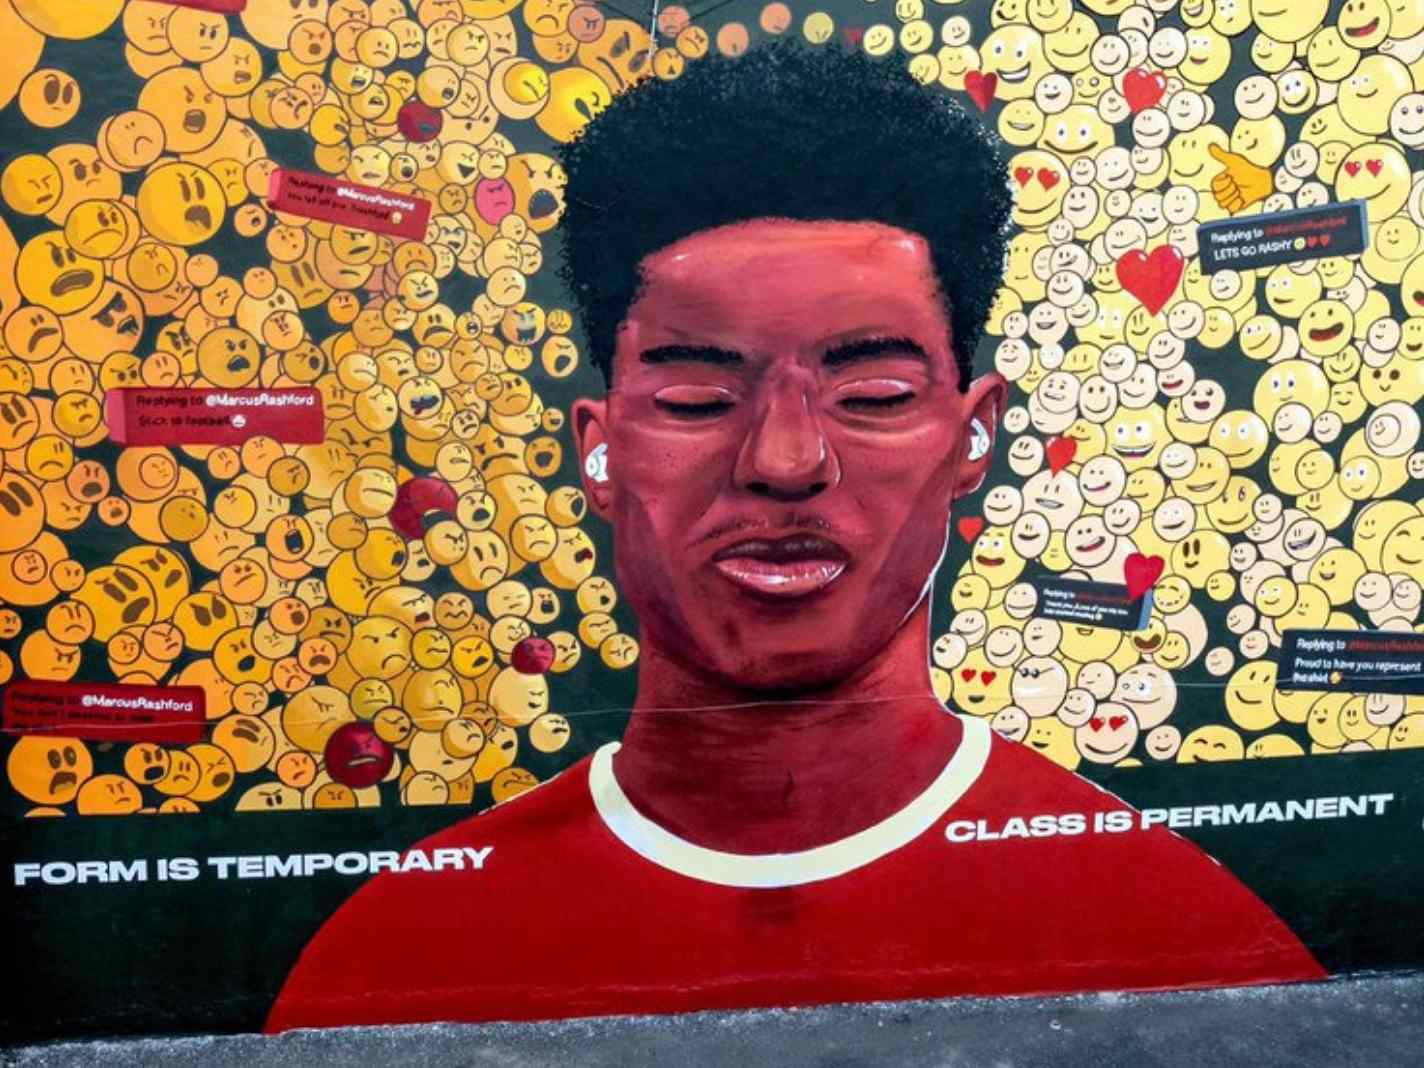 The photo shows the new Marcus Rashford mural that has been put up in the Northern Quarter area of Manchester.